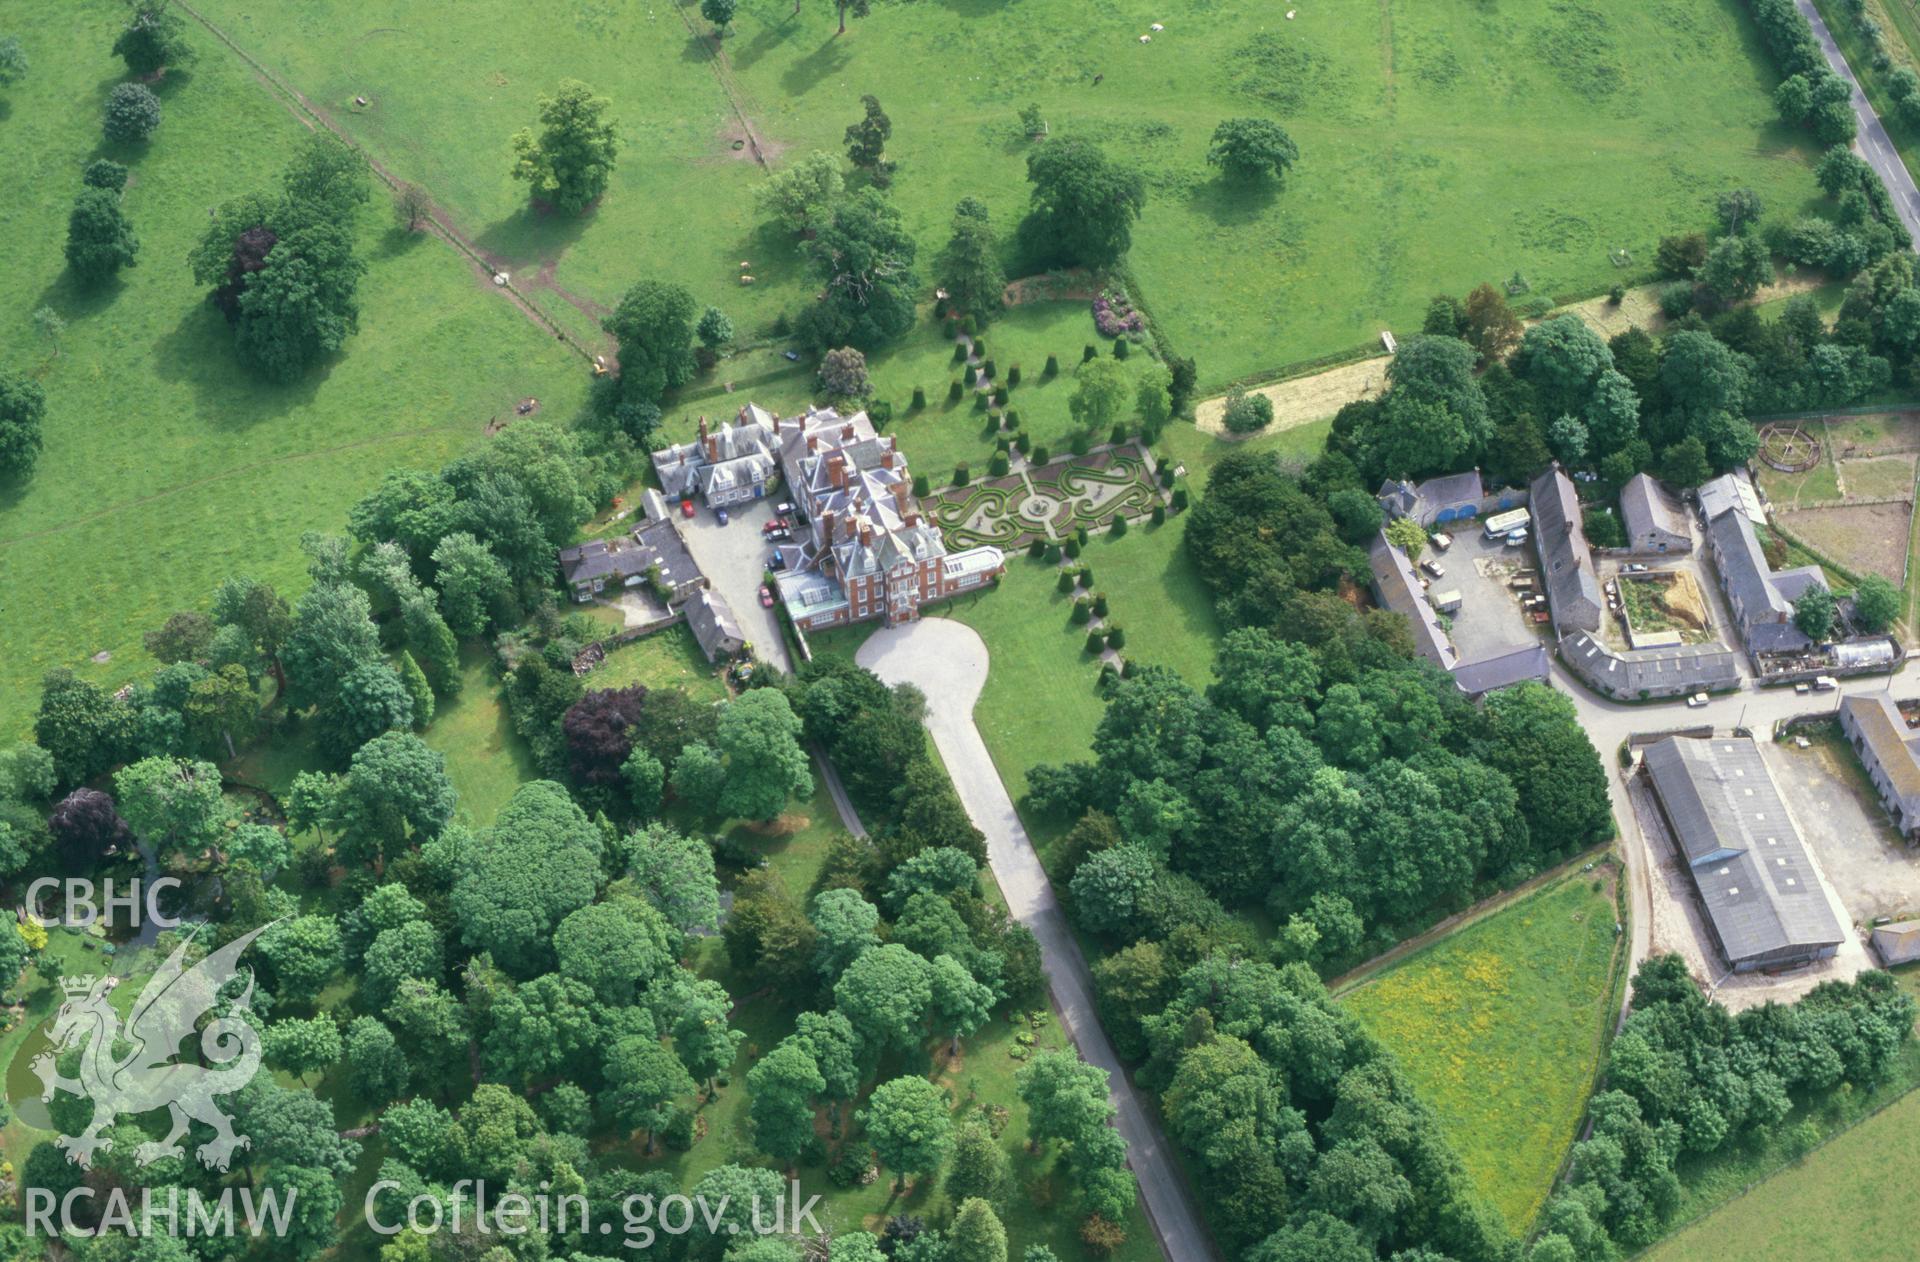 Slide of RCAHMW colour oblique aerial photograph of Bodrhyddan Hall, taken by Toby Driver, 2001.